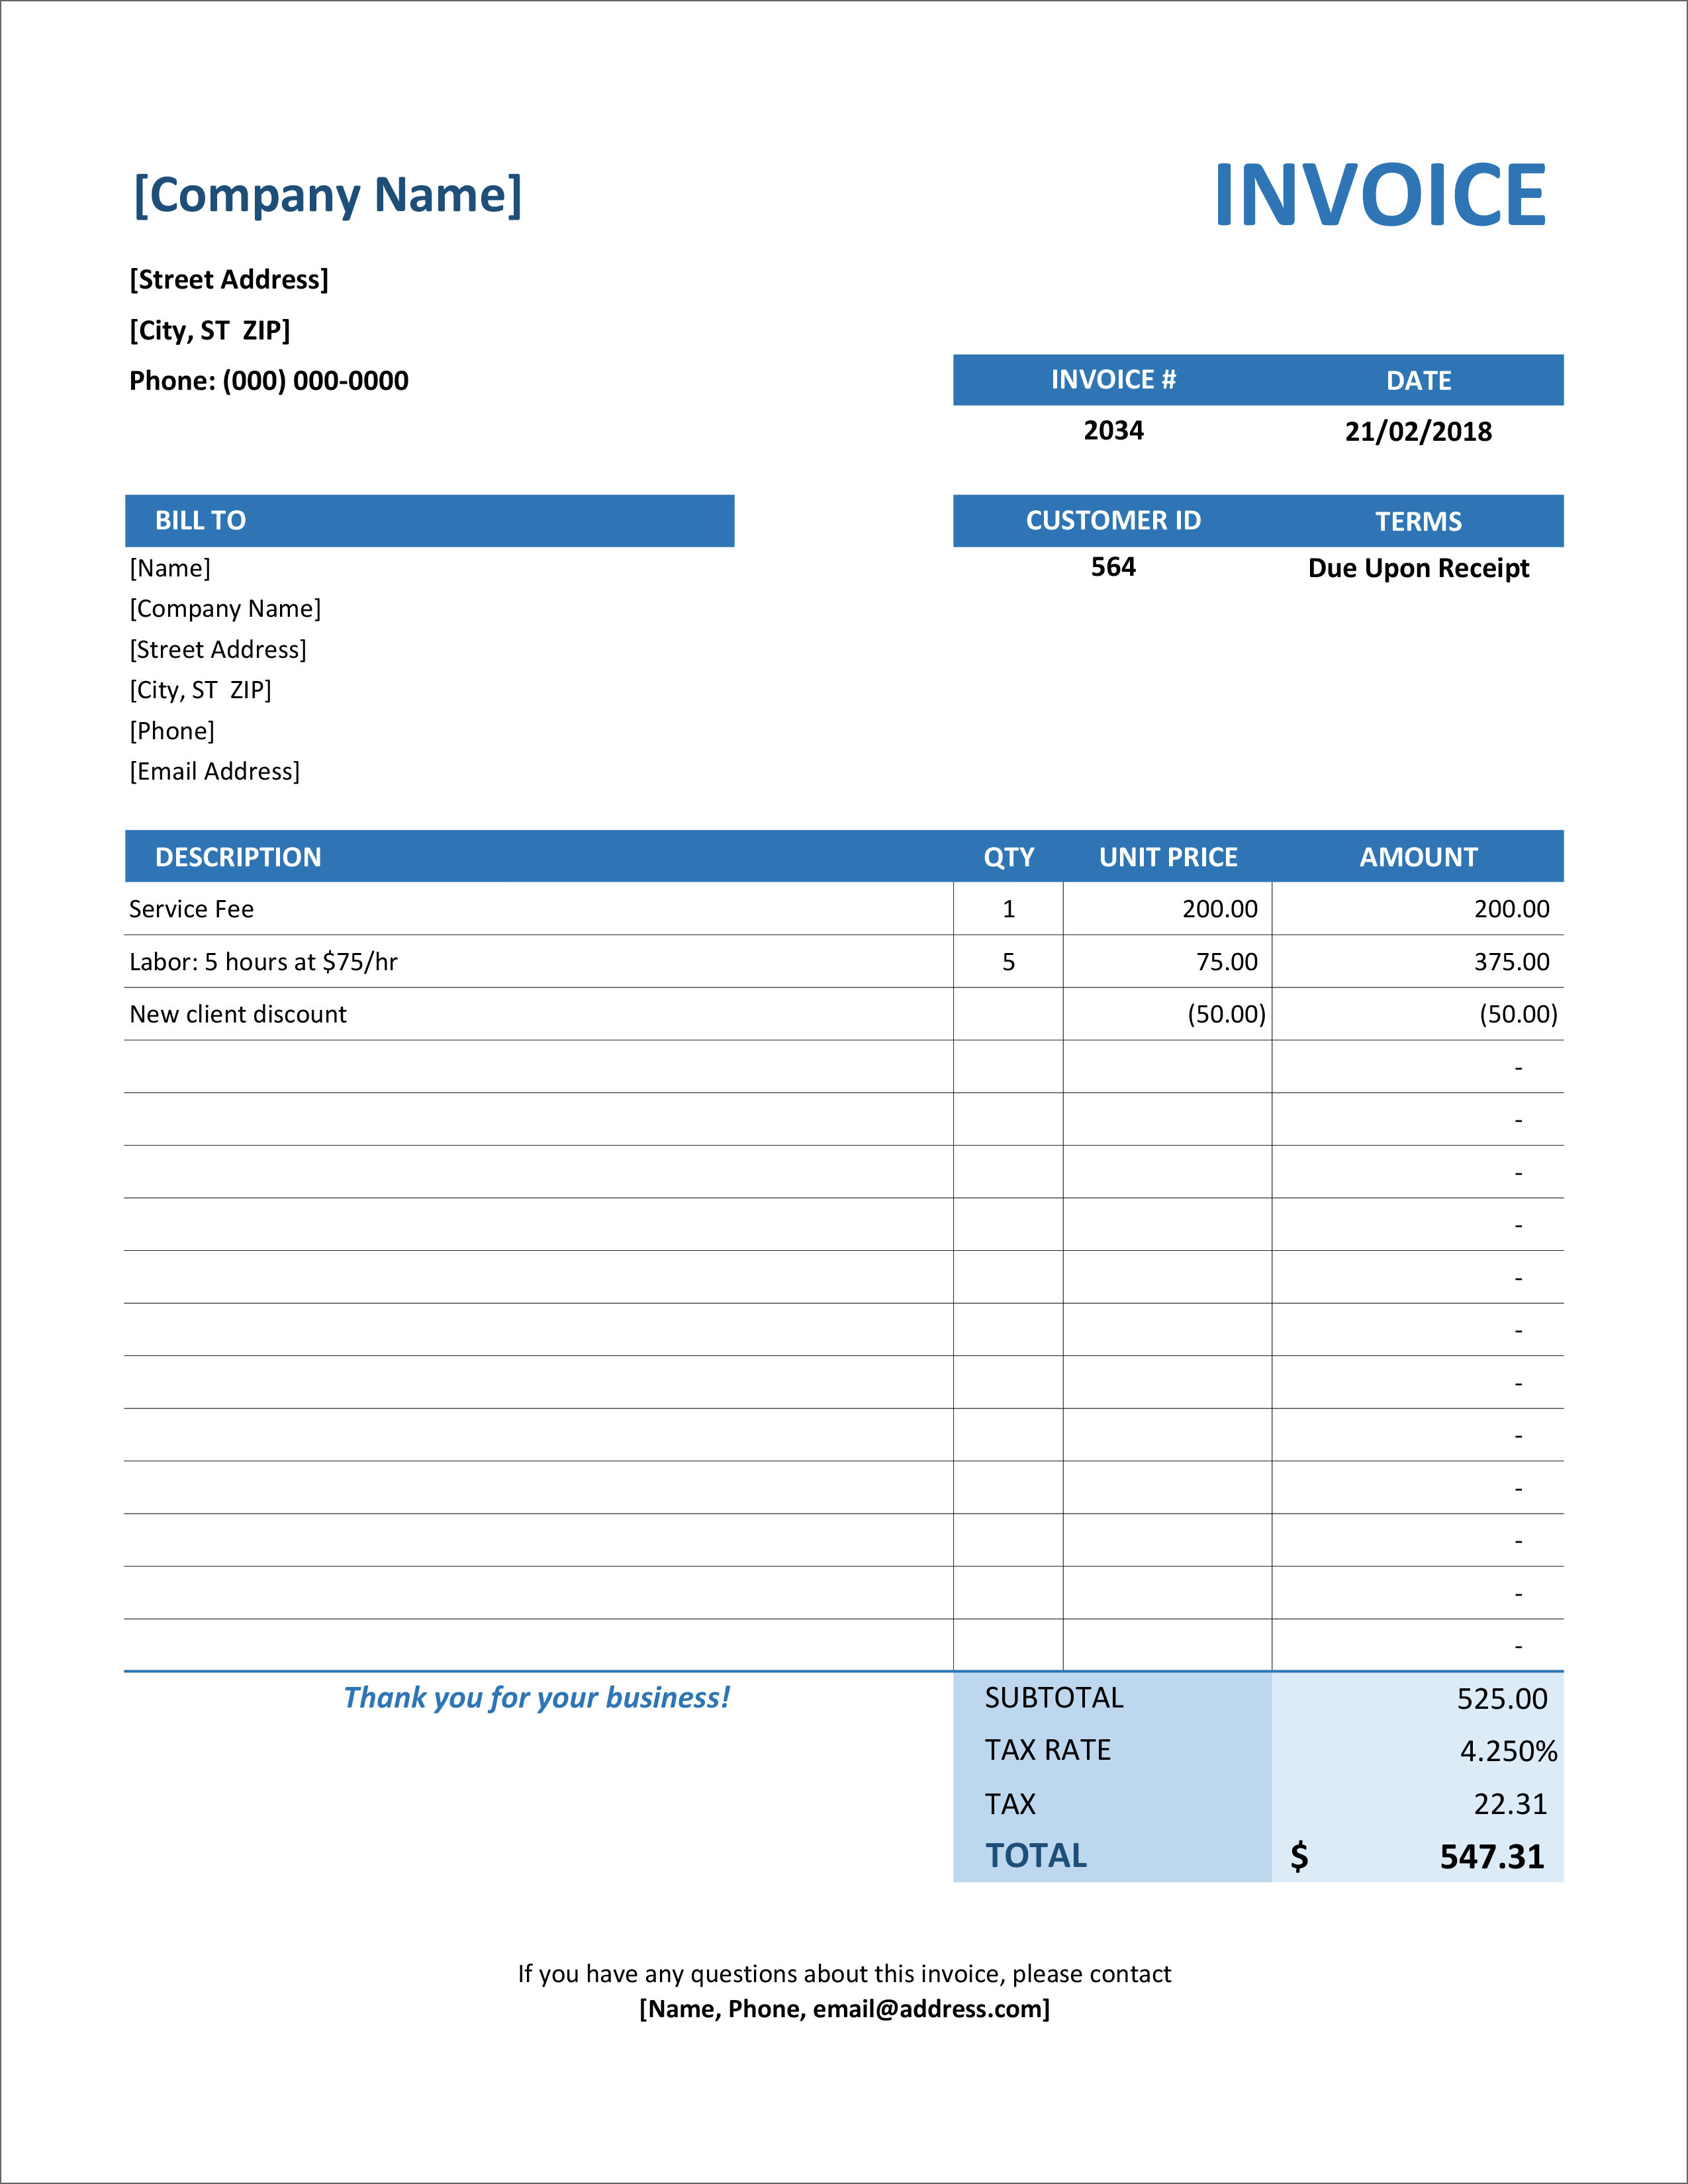 software to make invoices